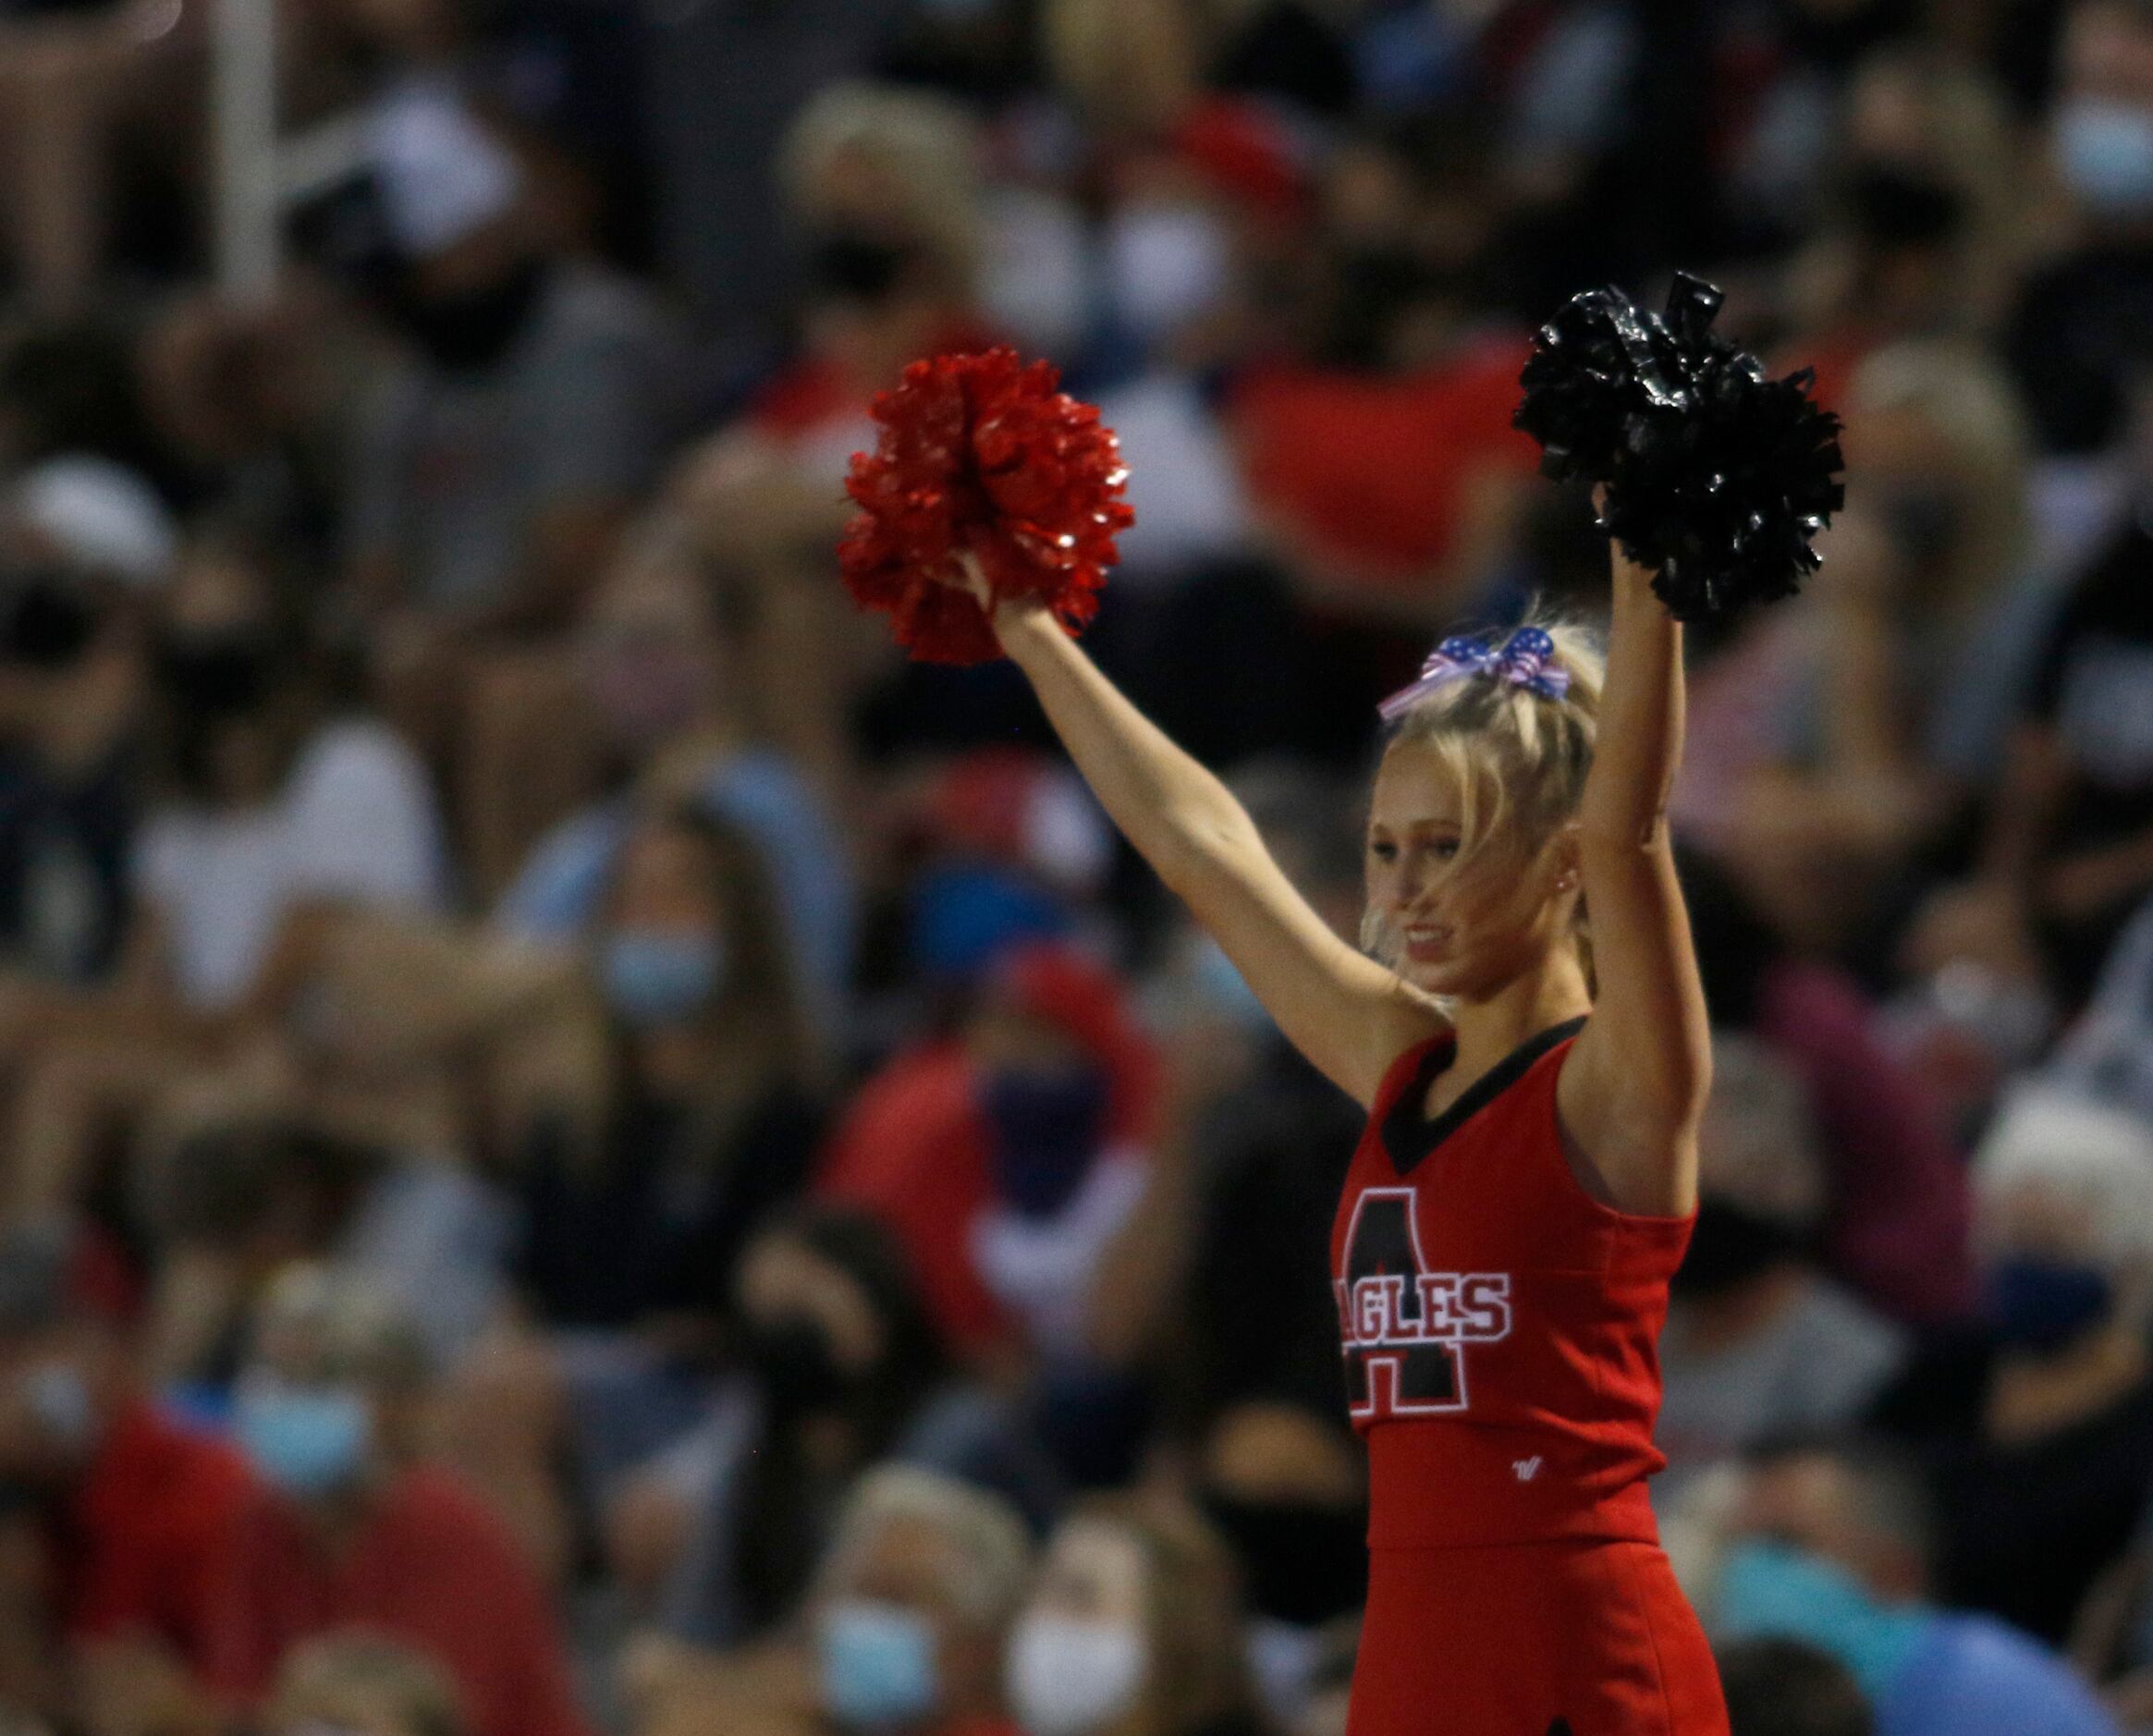 An Argyle cheerleader watches, as do Eagles fans, the opening kickoff of the Argyle versus...